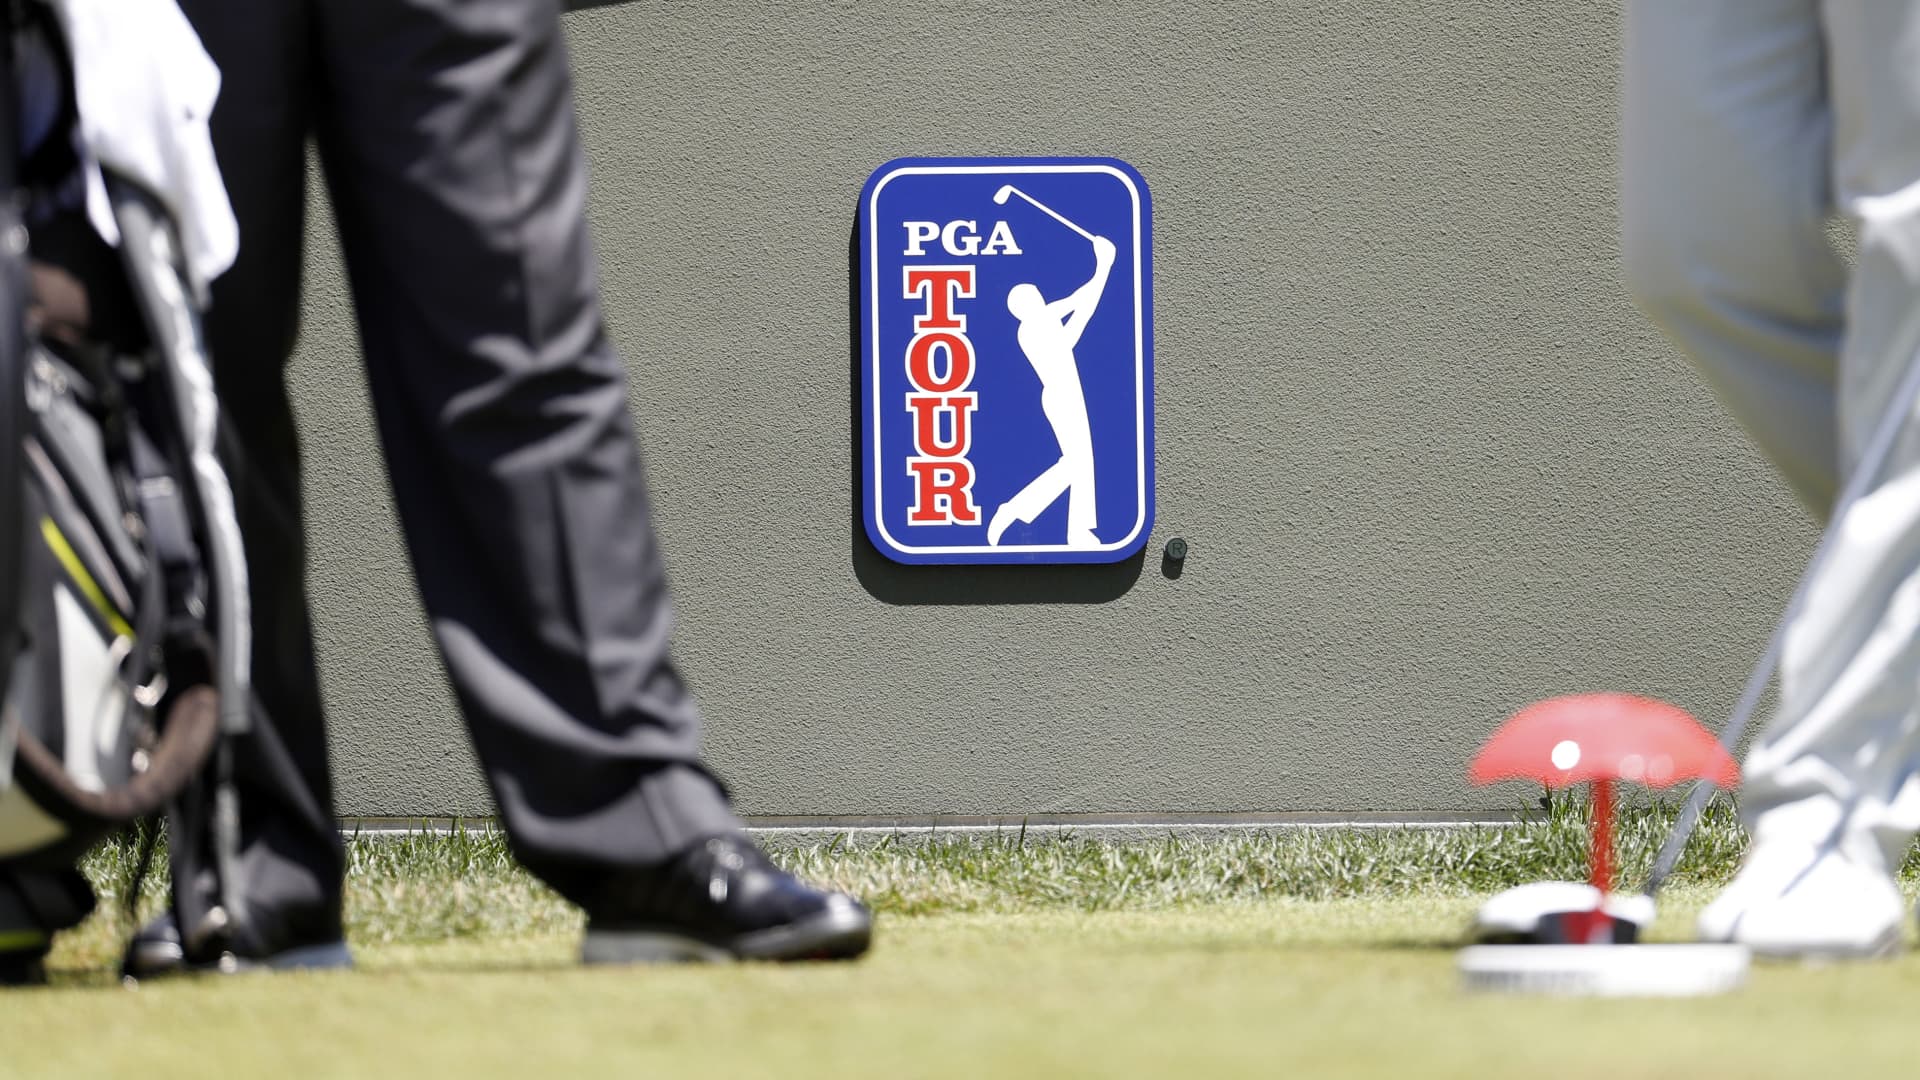 Endeavor, Fenway Sports activities think about PGA Tour funding